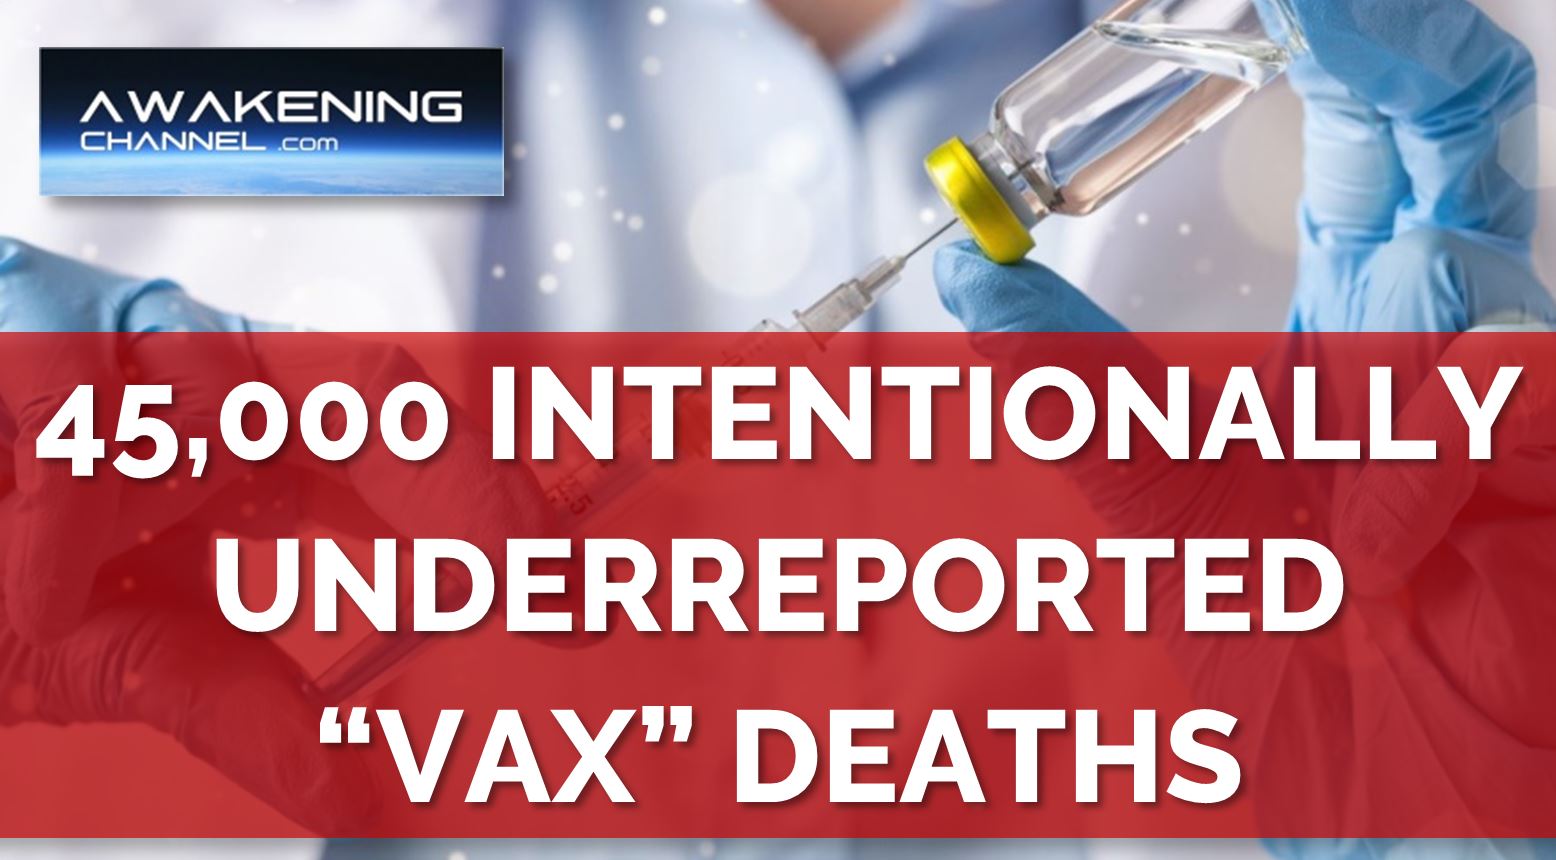 New CLASS ACTION AGAINST THE VACCINE. 45,000 Intentionally Underreported “Vax” Deaths